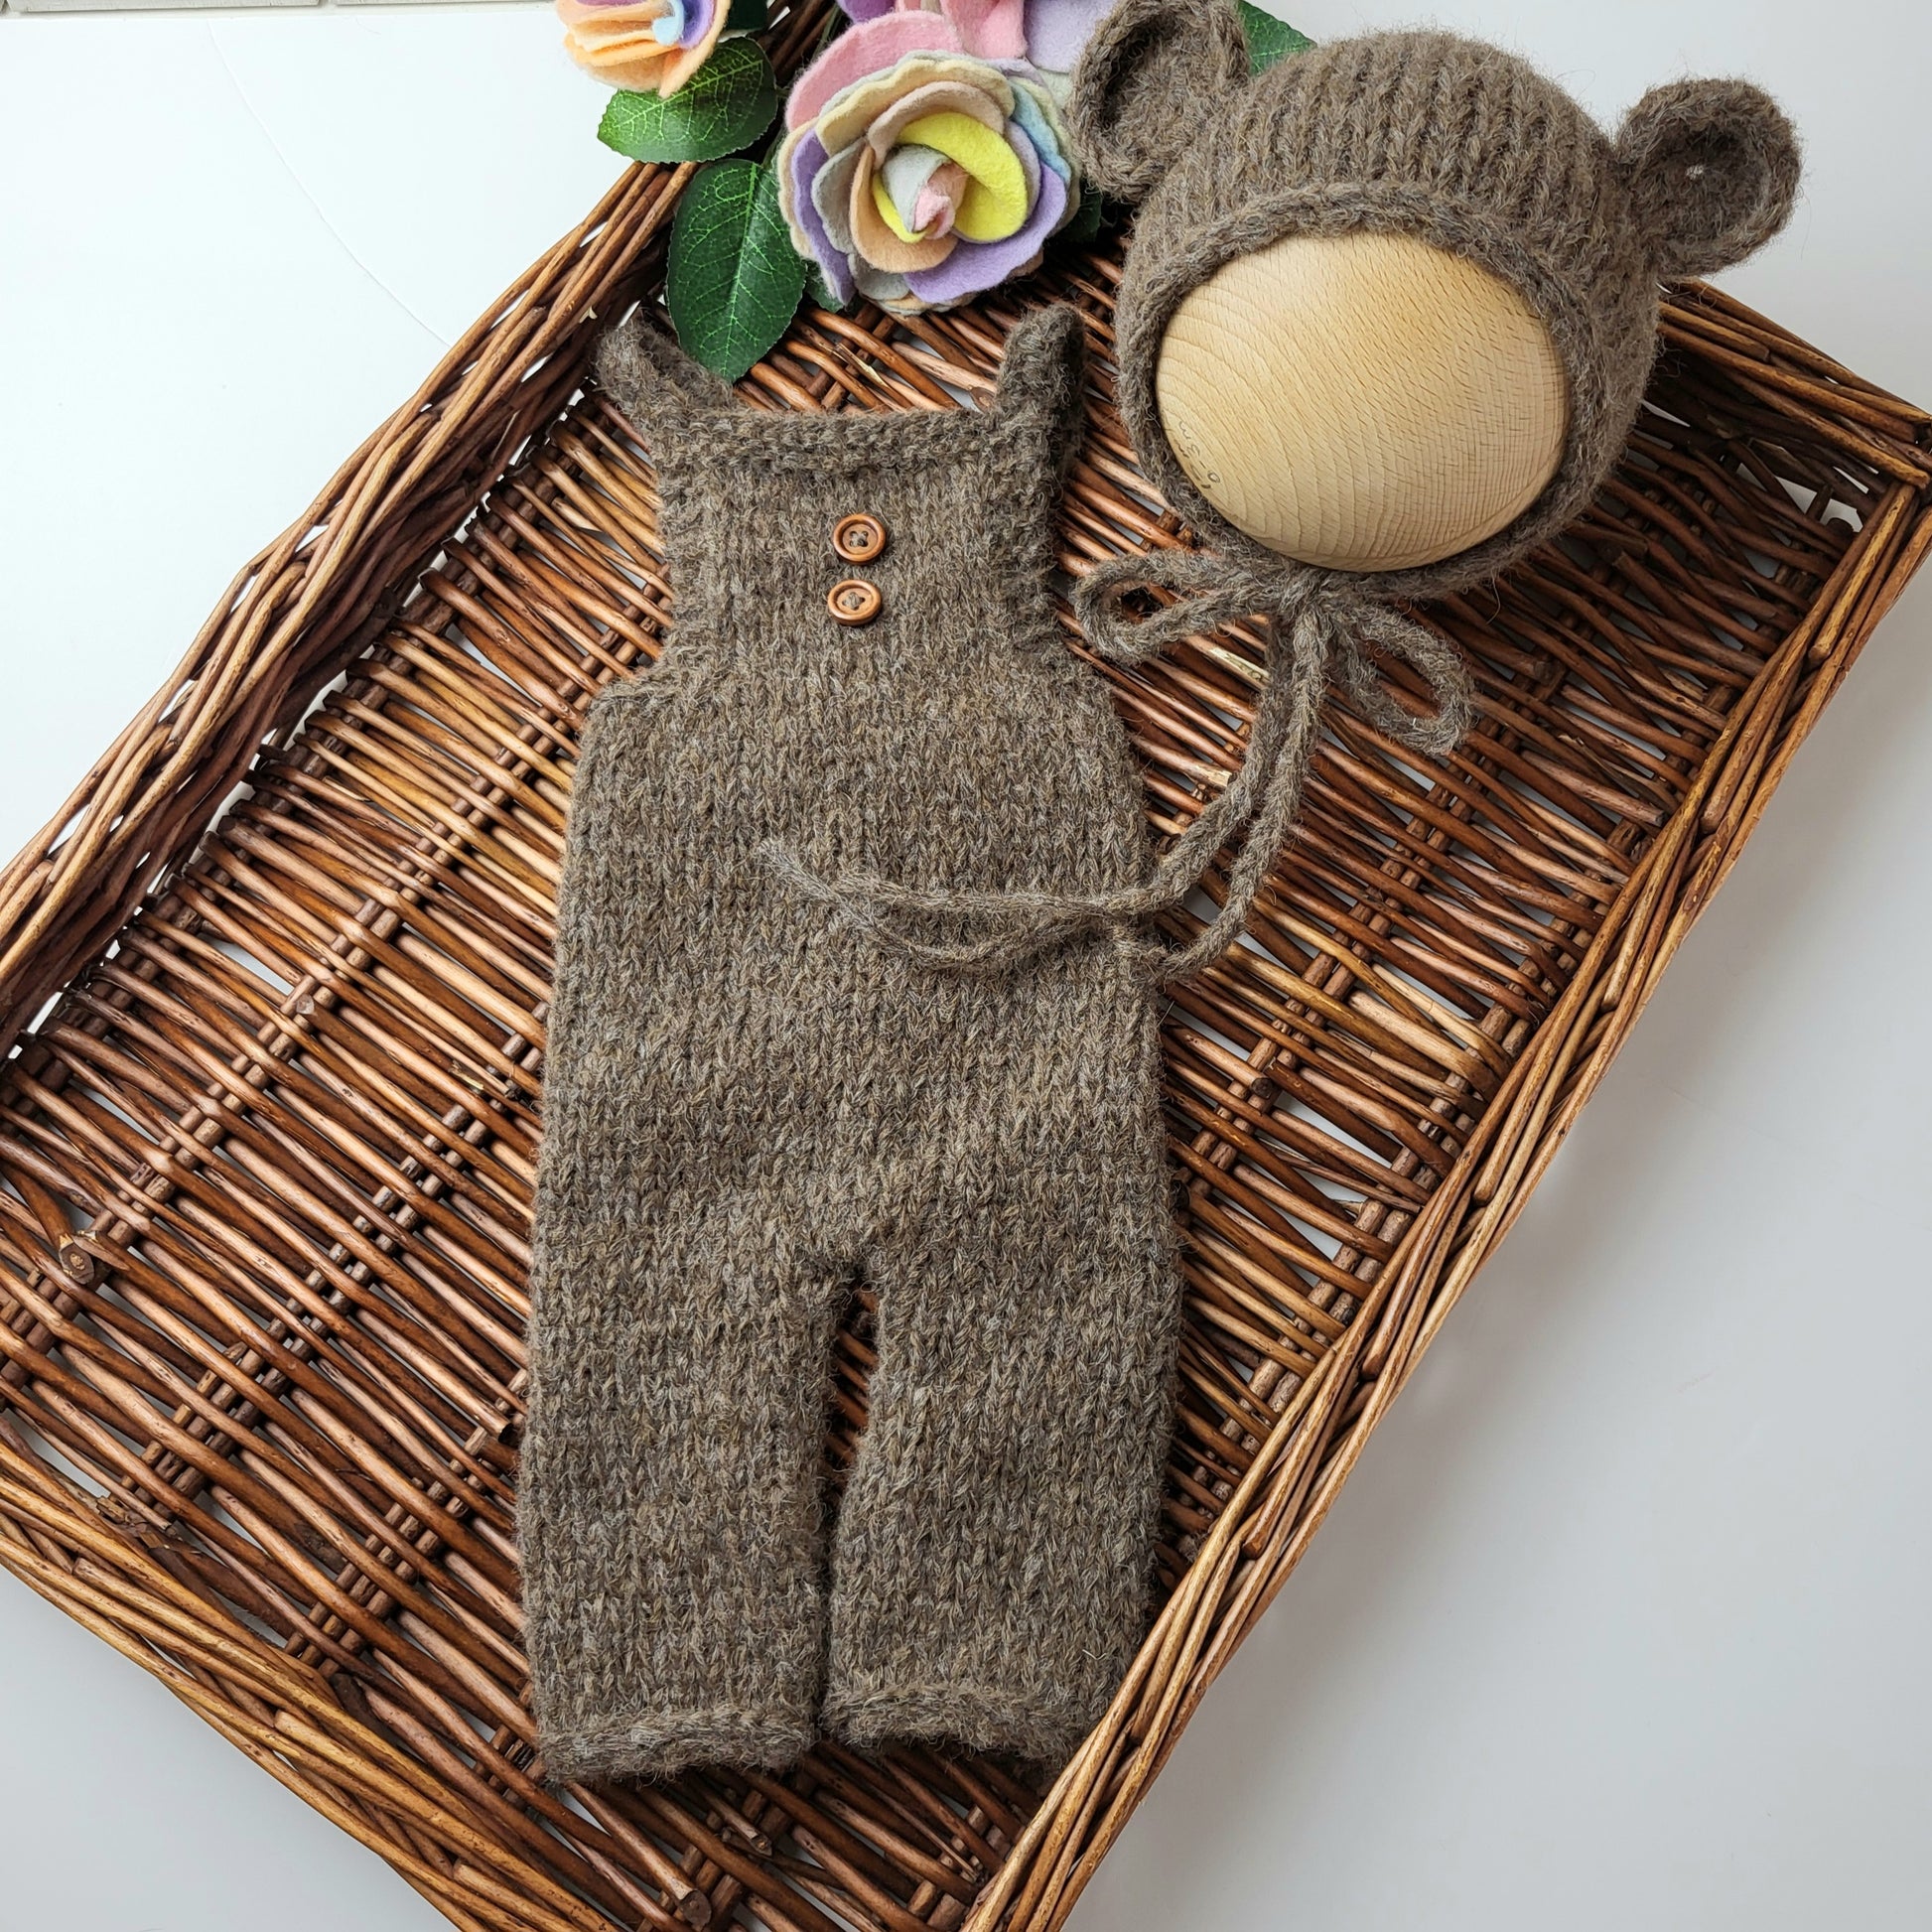 Brown knotted newborn dungaree and bear bonnet